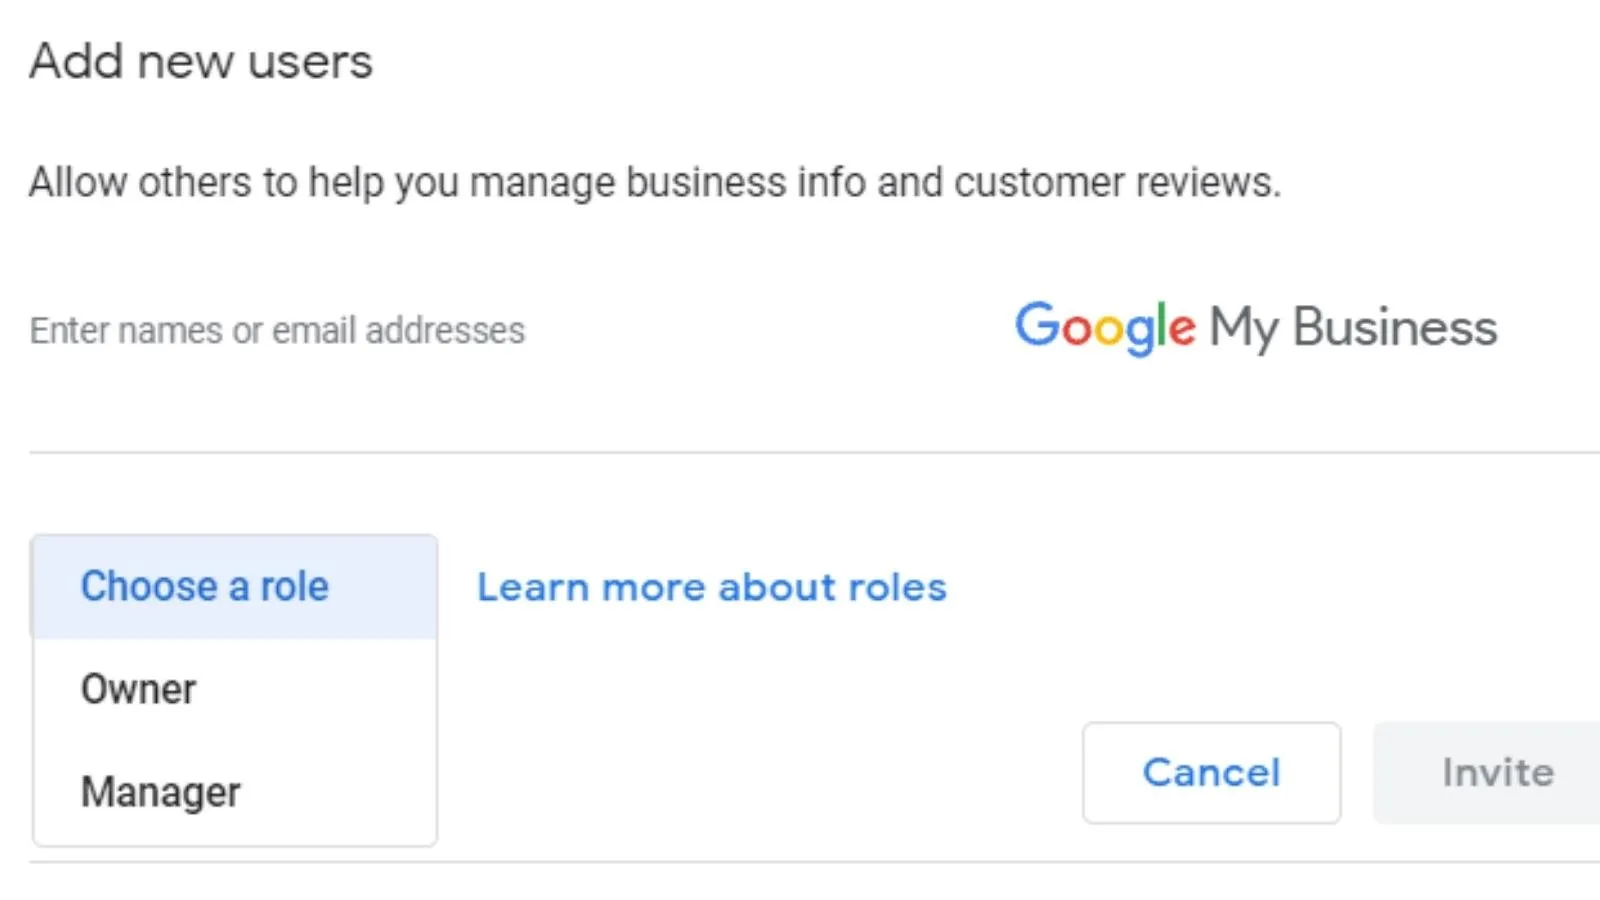 How to Use Google My Business with Different Users